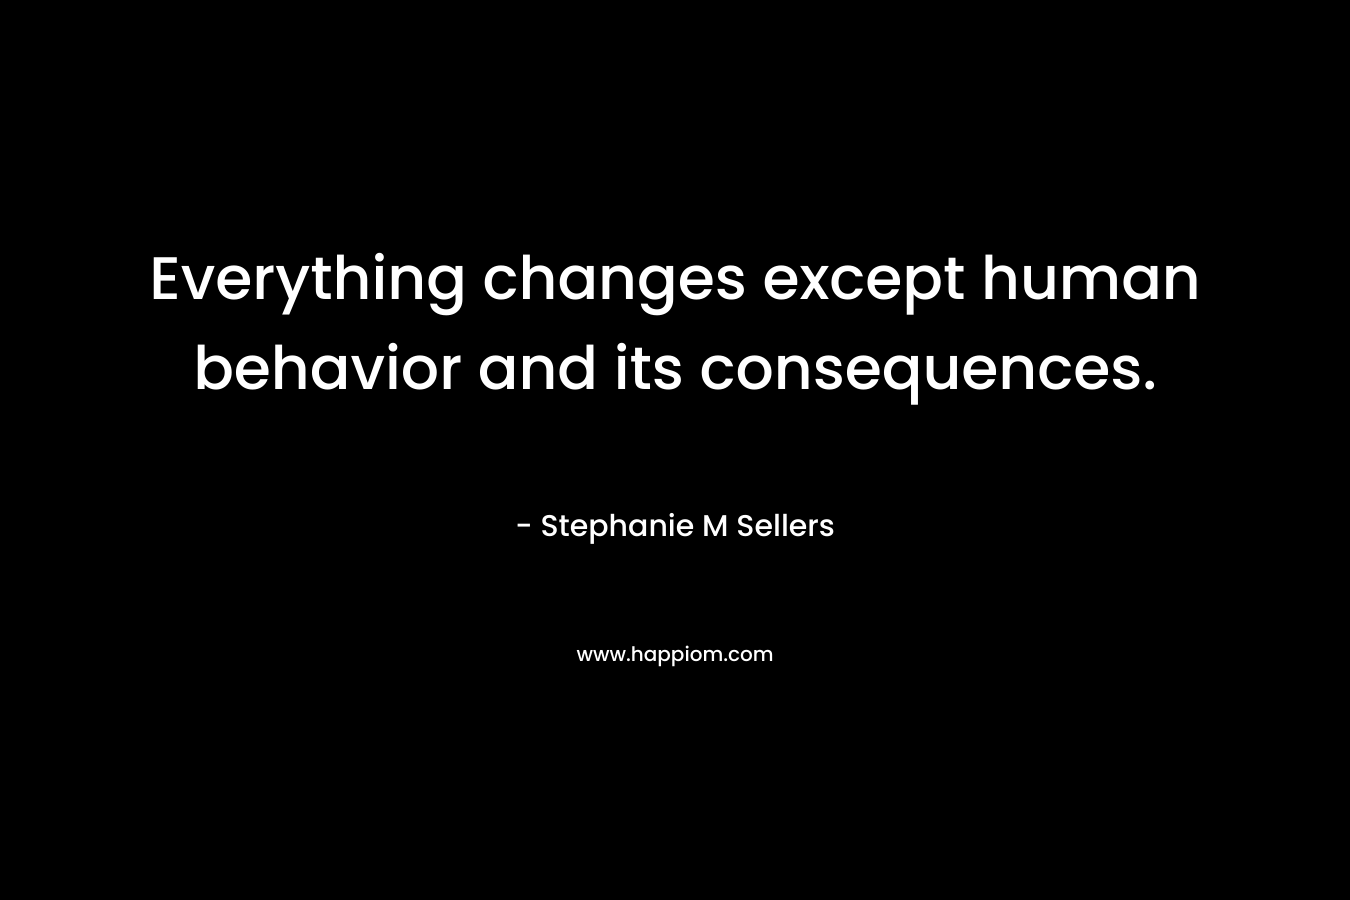 Everything changes except human behavior and its consequences.